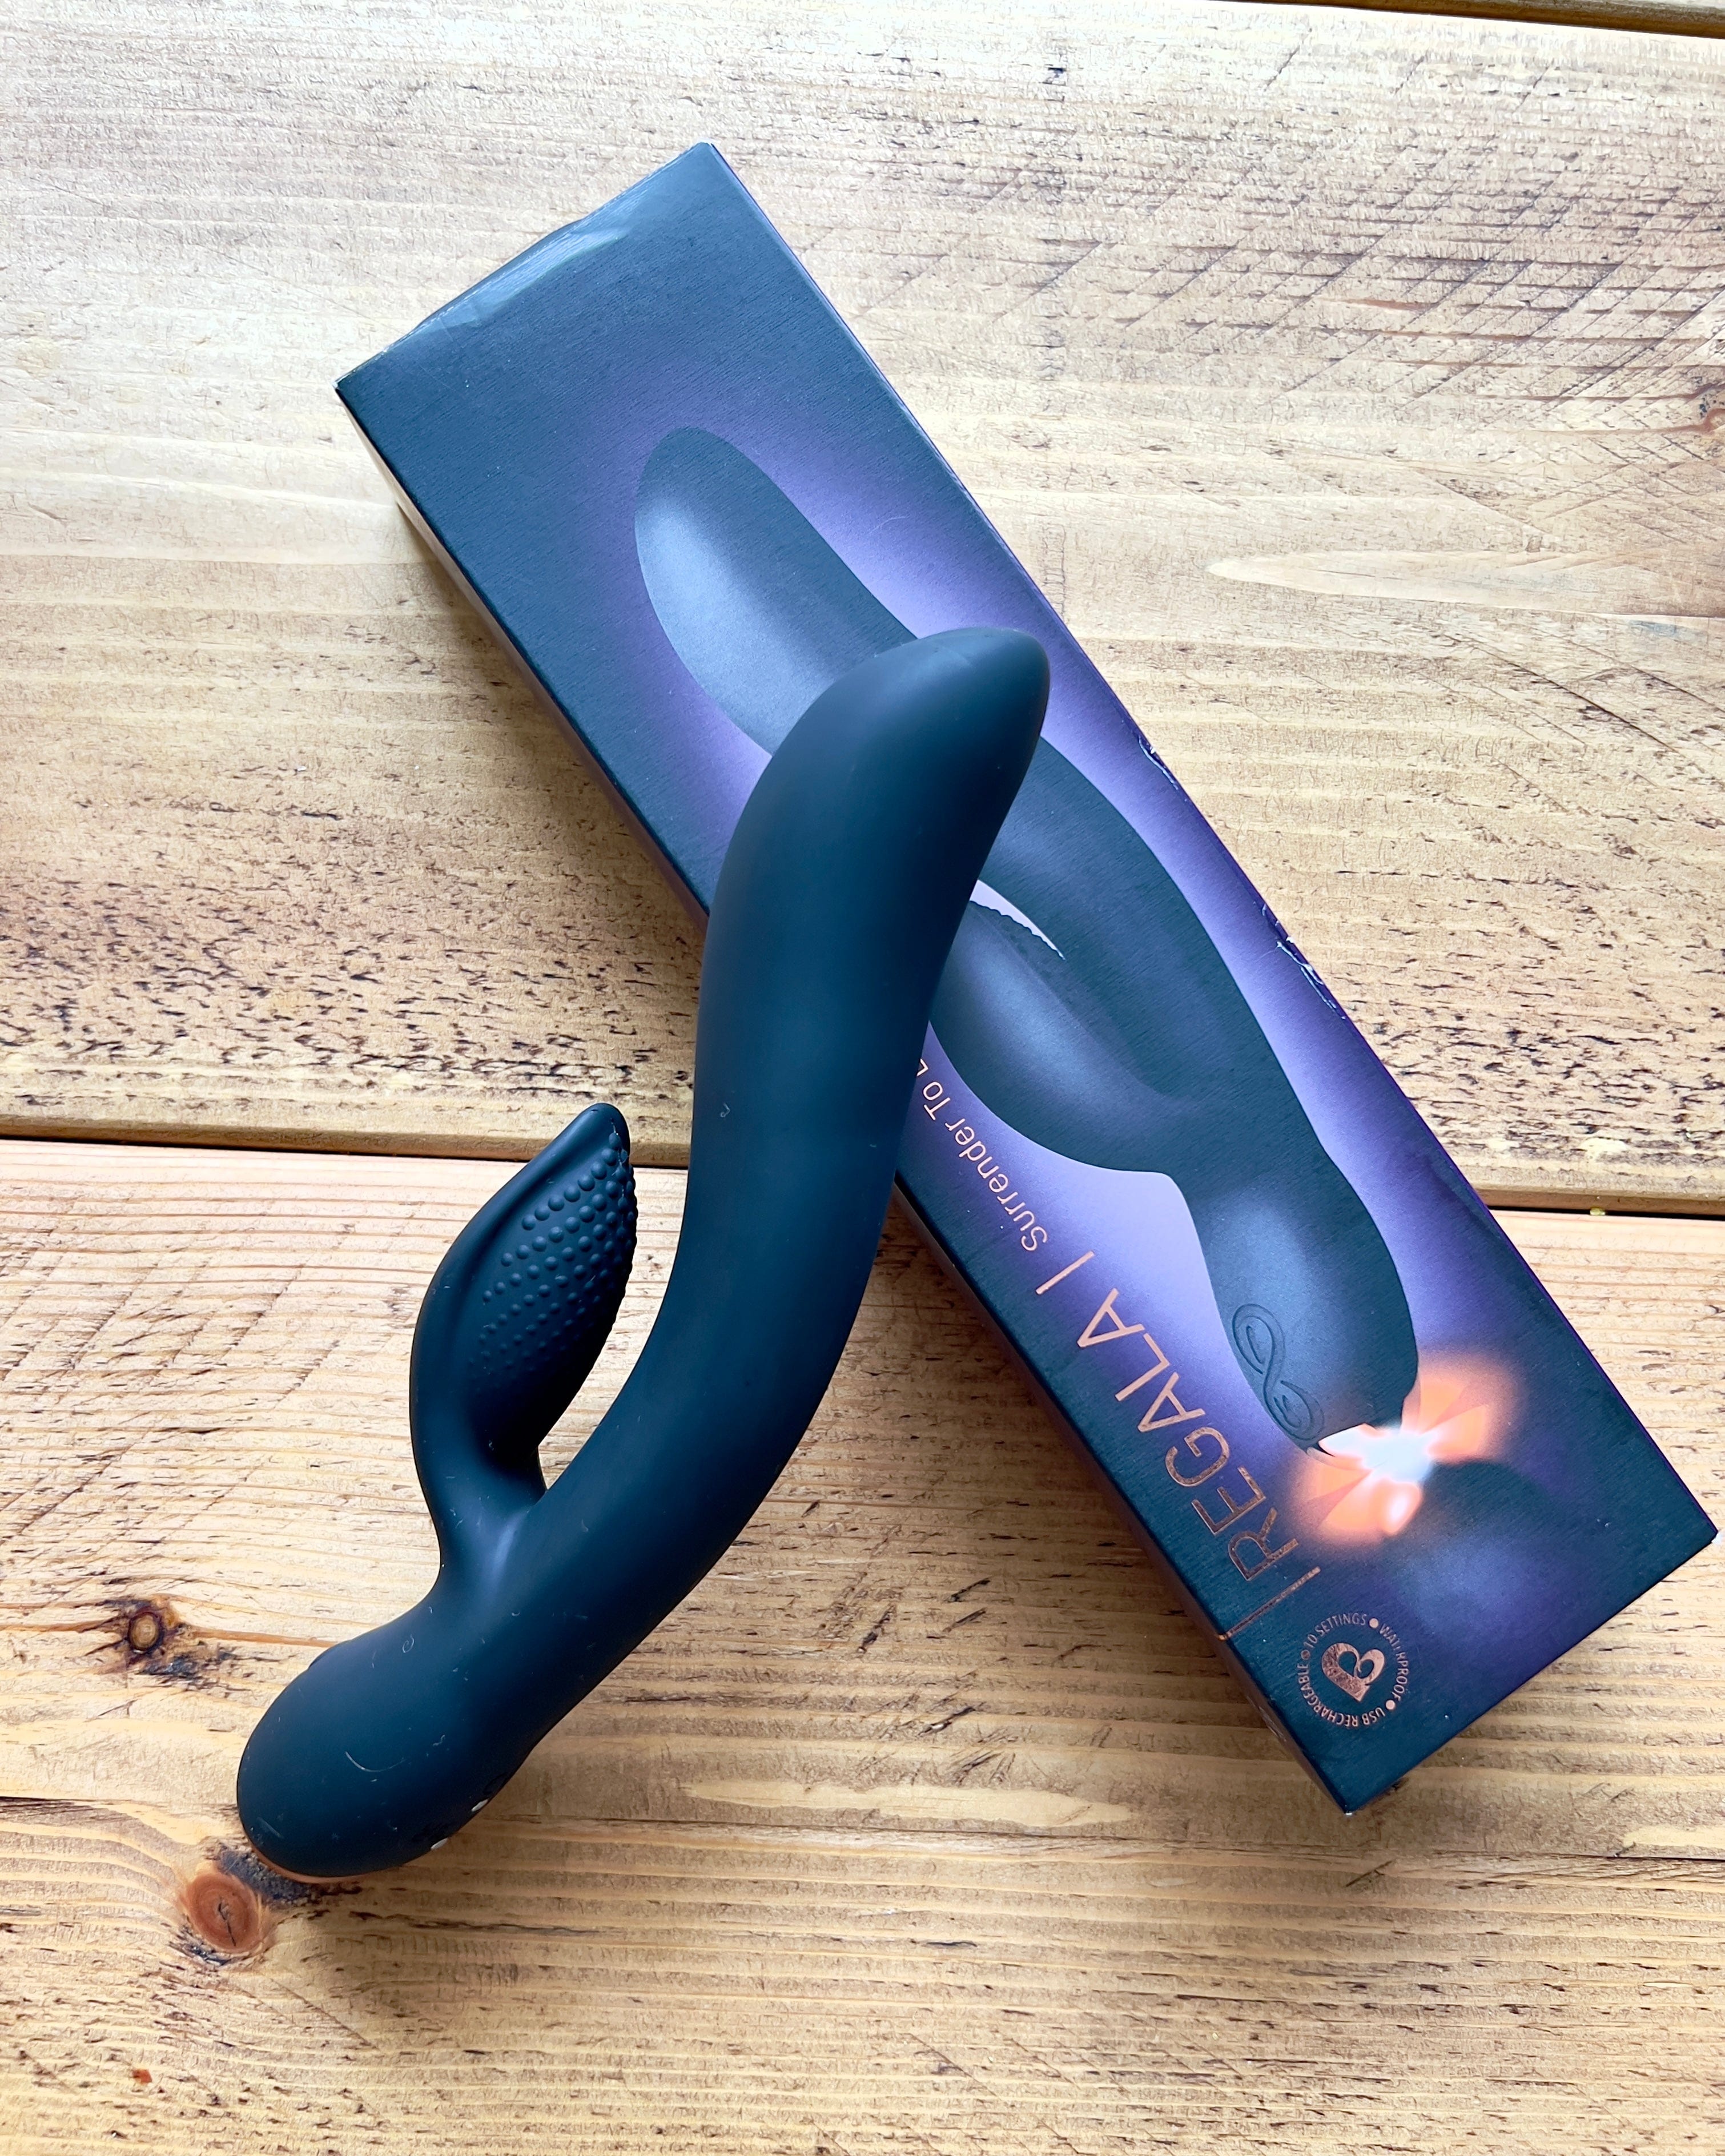 The powerful dual independent motors will become the catalyst of your own unique blend of pleasure as Regala sends deep sensual vibrations to the shaft, tip, and clitoral stimulation points as you fall endlessly and deeply into a shuddering full-body orgasm. Close your eyes and take a deep breath… 